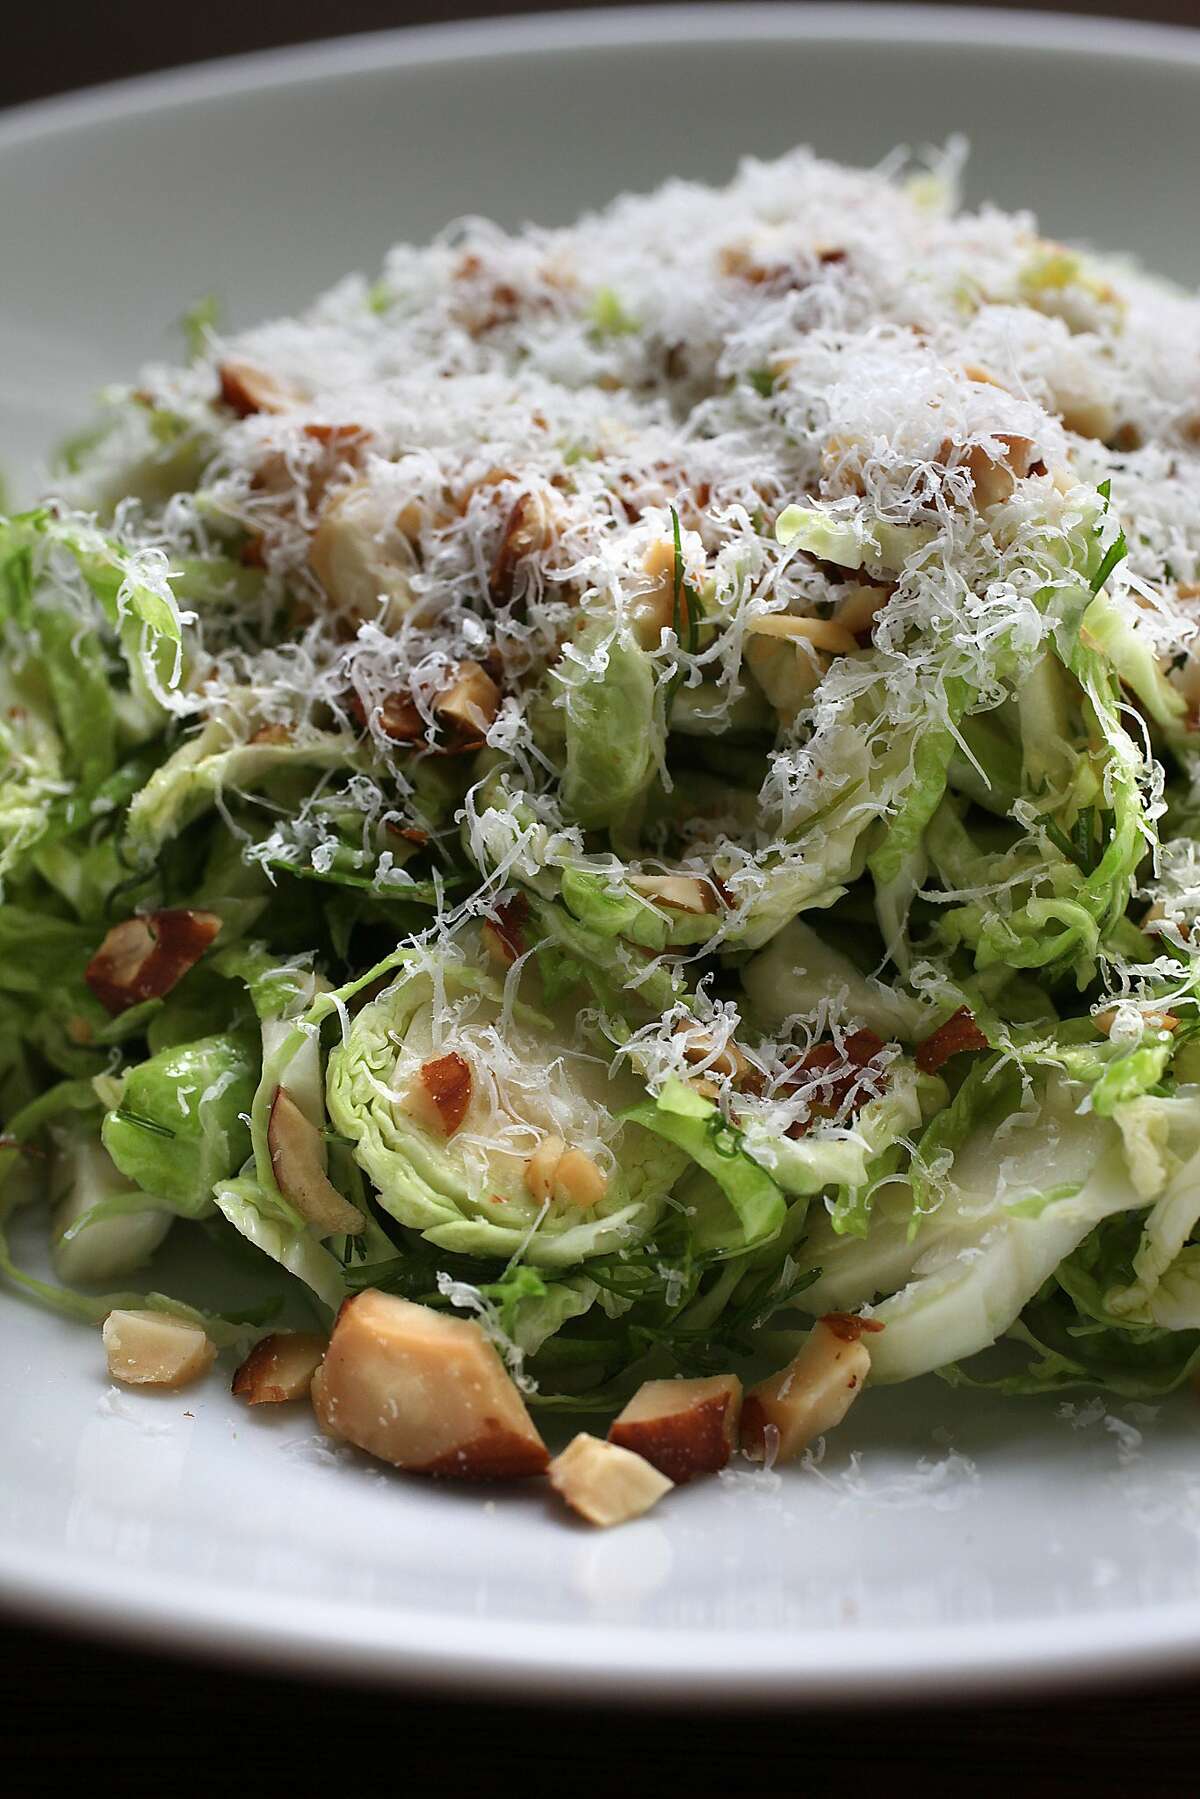 Shaved brussel sprout salad with dill and cheese by Molly Watson in San Francisco, Calif., on Thursday, October 30, 2014.